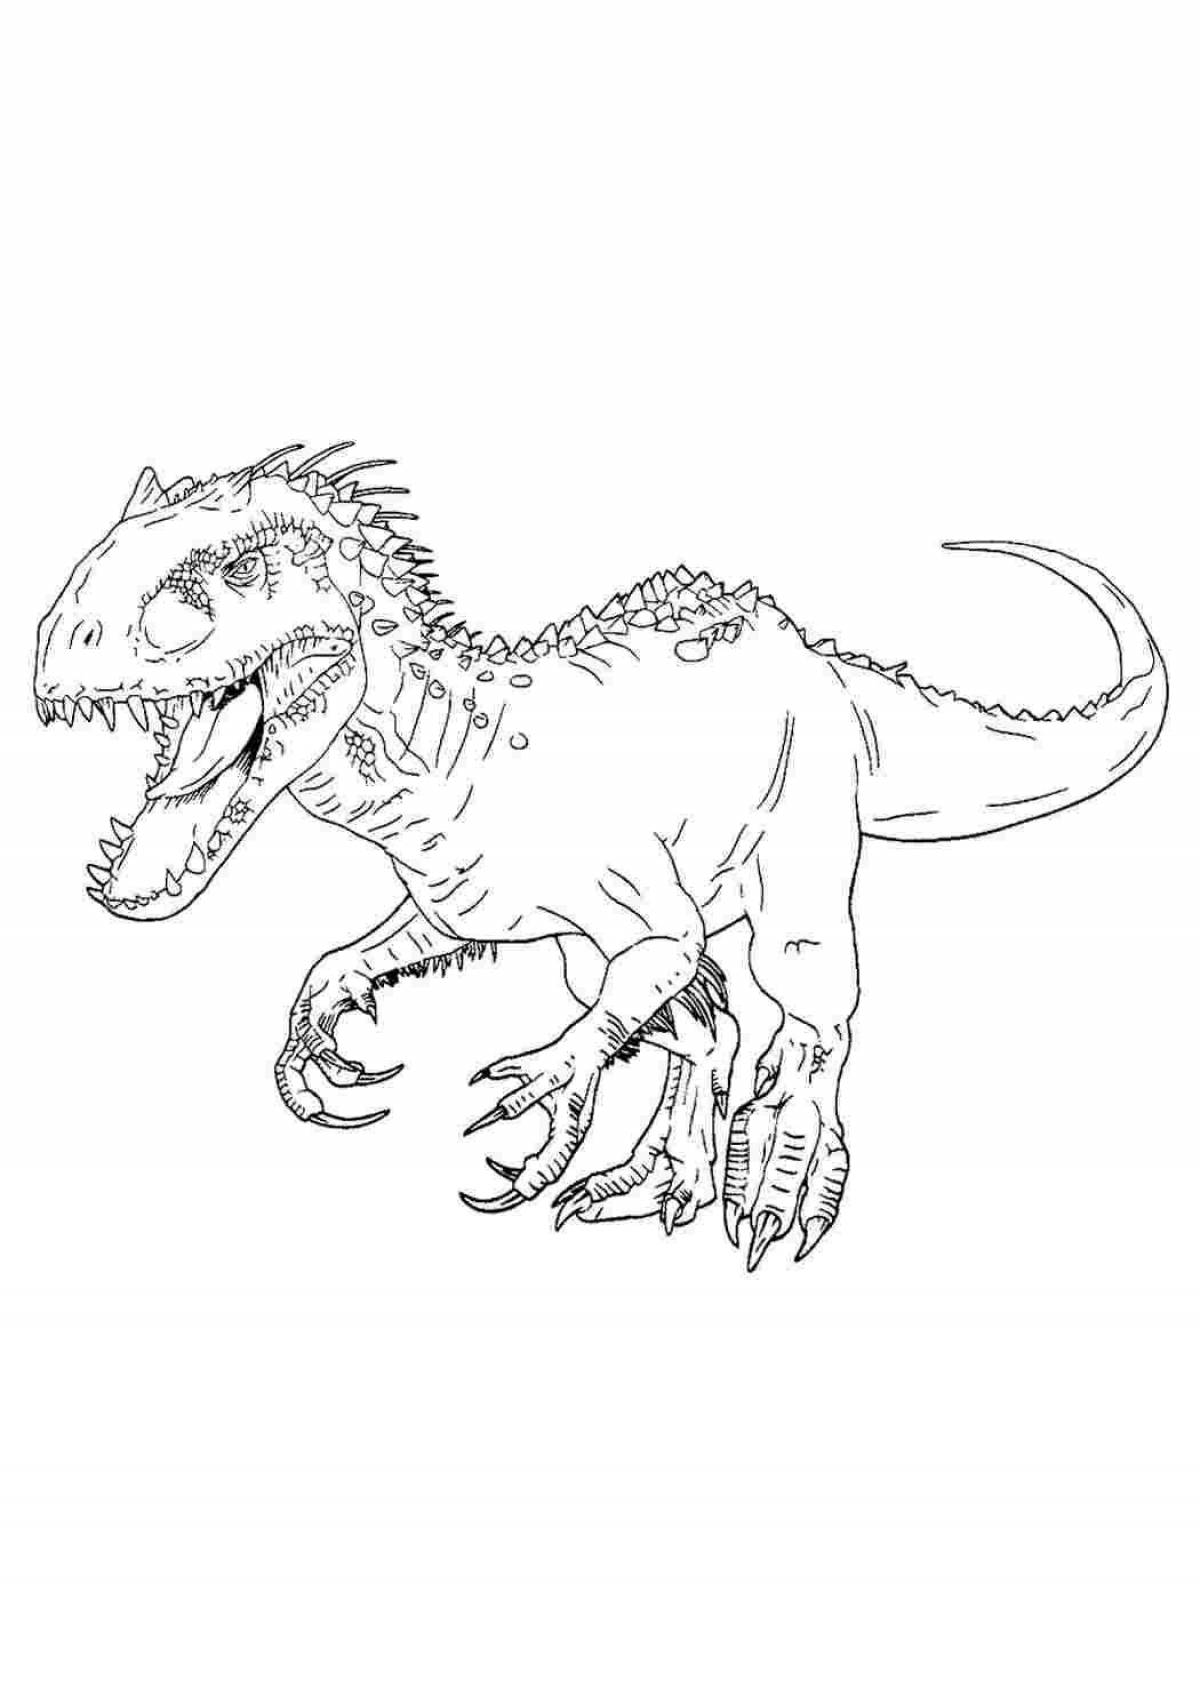 Indominus rex coloring book for kids